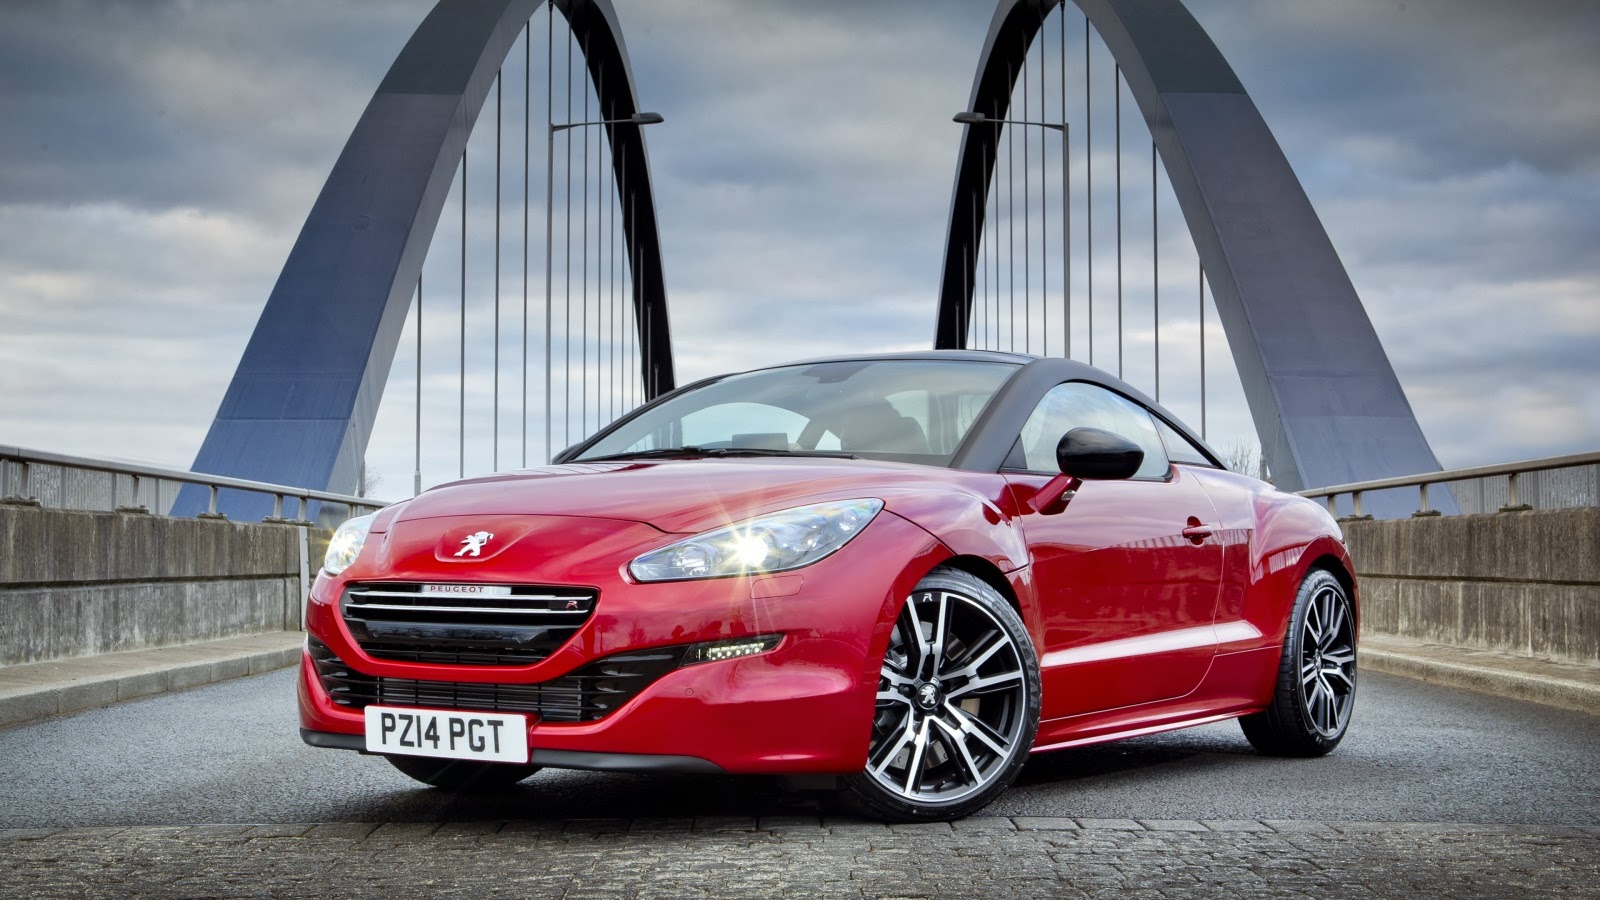 2013 peugeot related images,start 50 - WeiLi Automotive Network